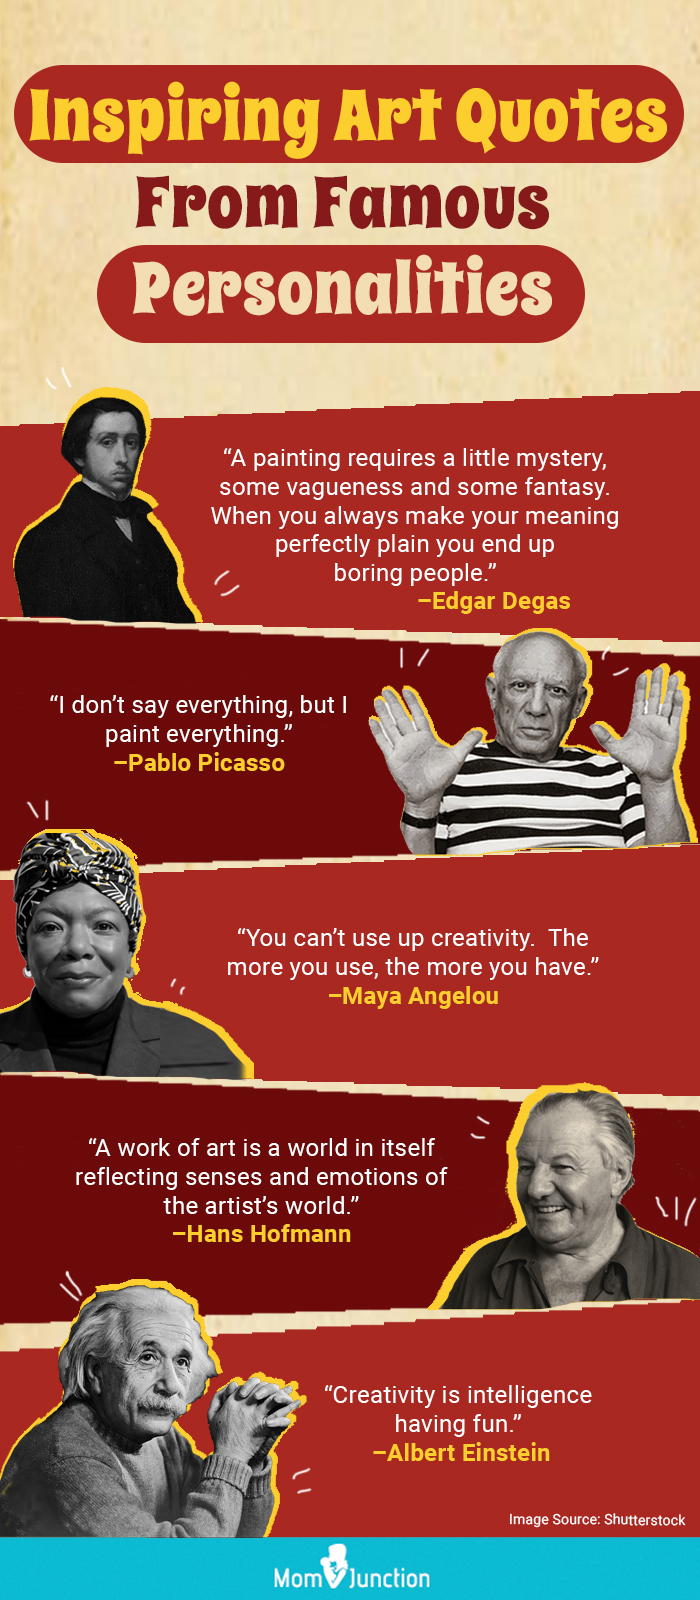 quotes by famous artists